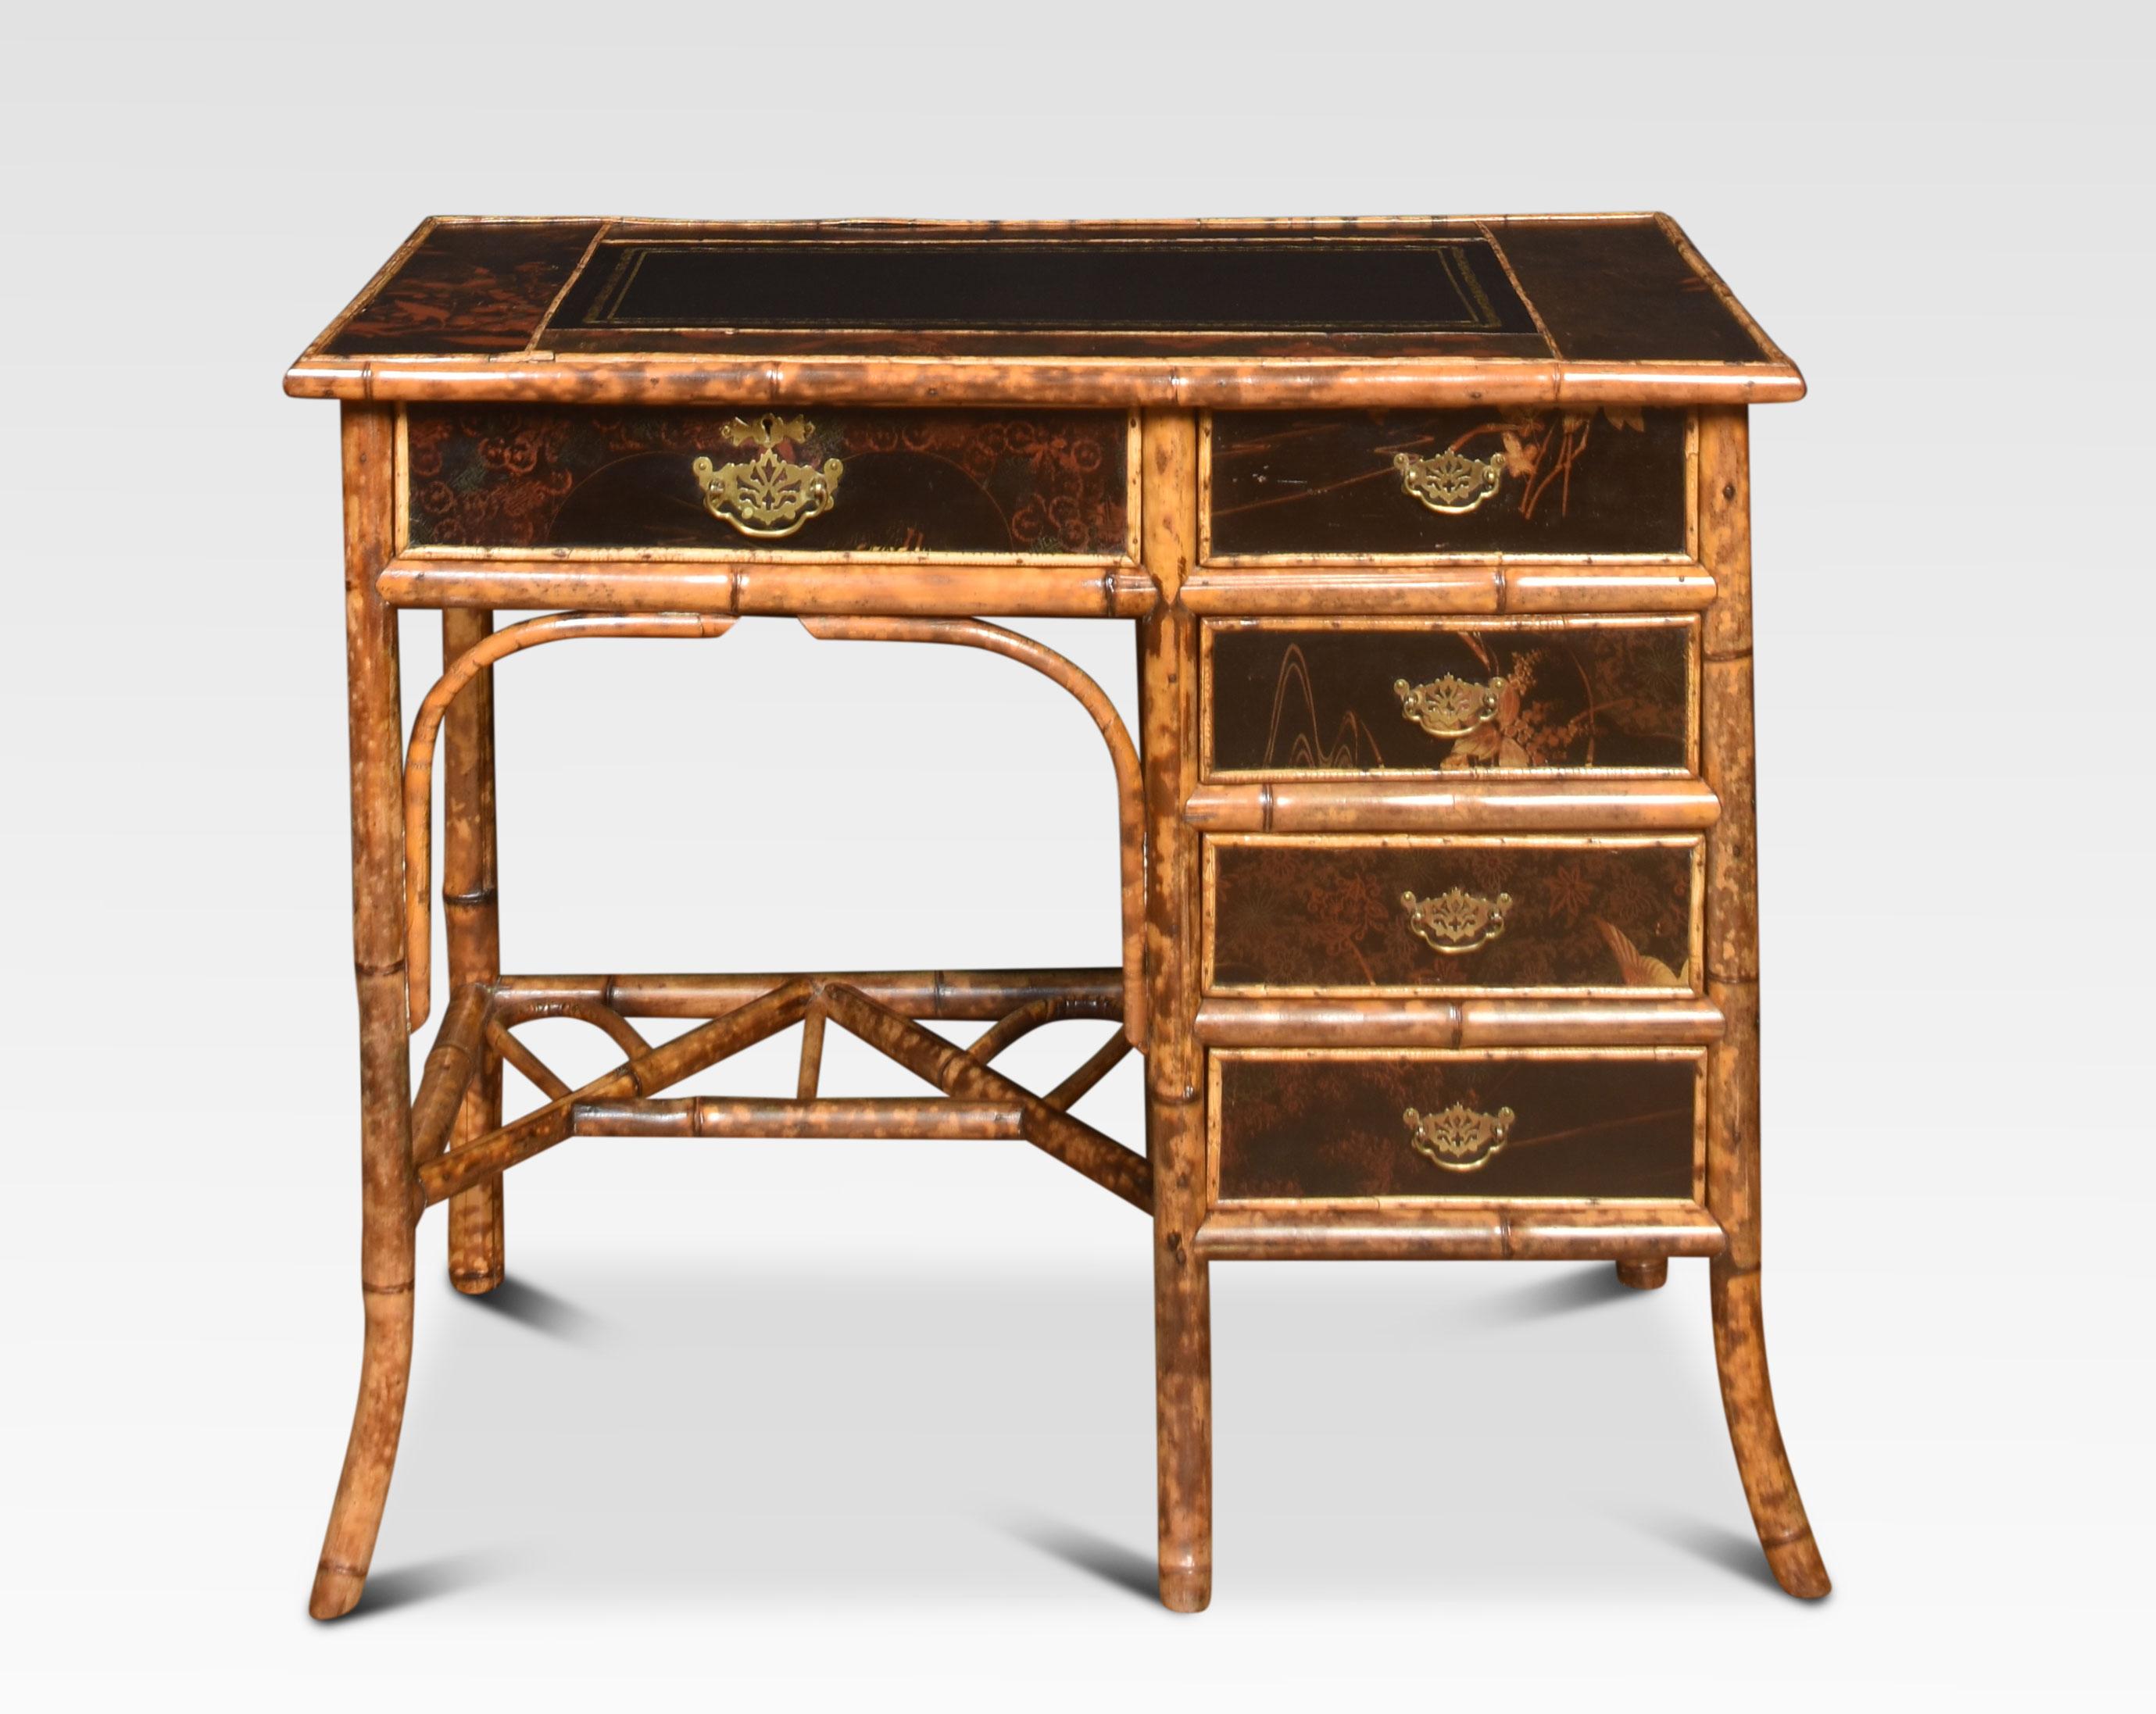 19th-century bamboo black lacquered writing desk having black leather inset writing surface above an arrangement of drawers, with painted floral detail. All raised up on splayed bamboo legs united by cross stretchers.
Dimensions
Height 29.5